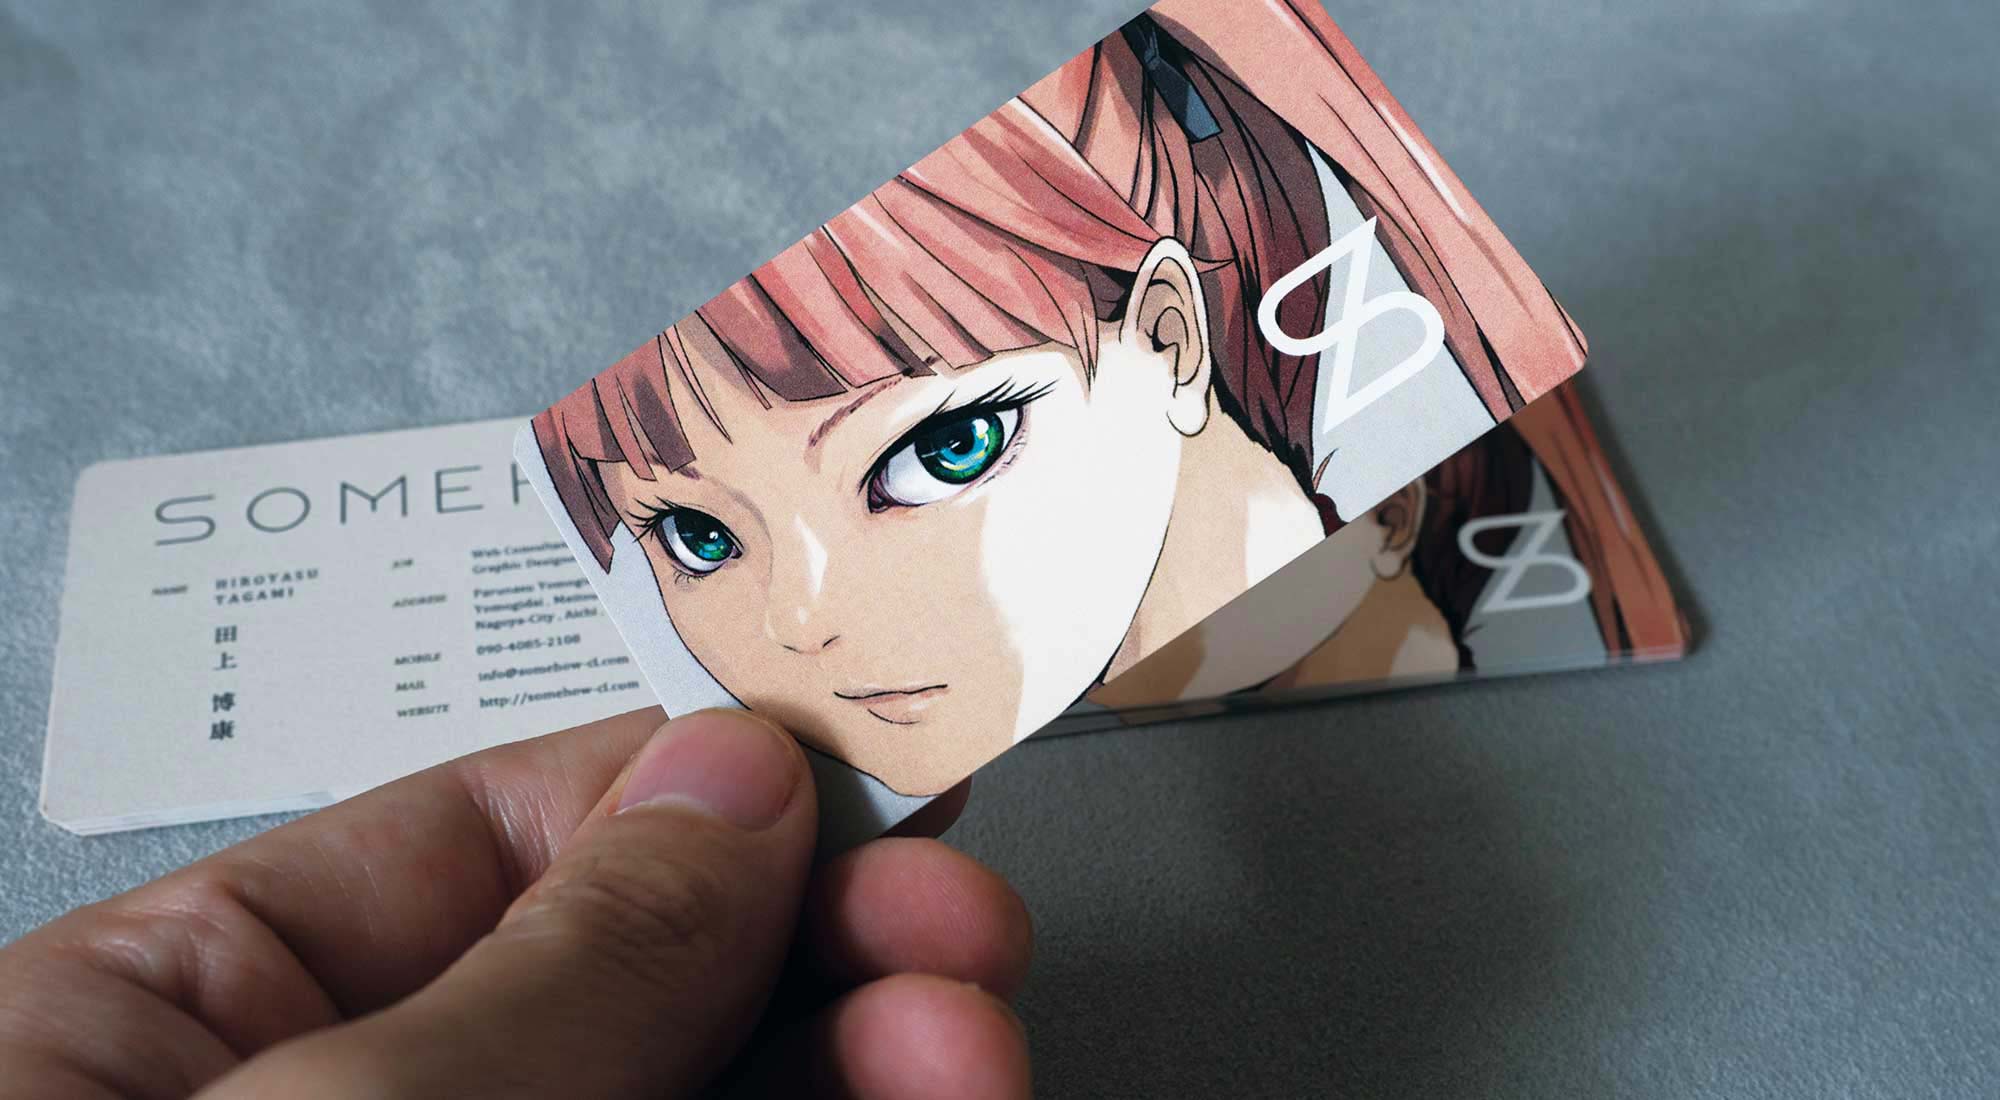 Somehow Business Card